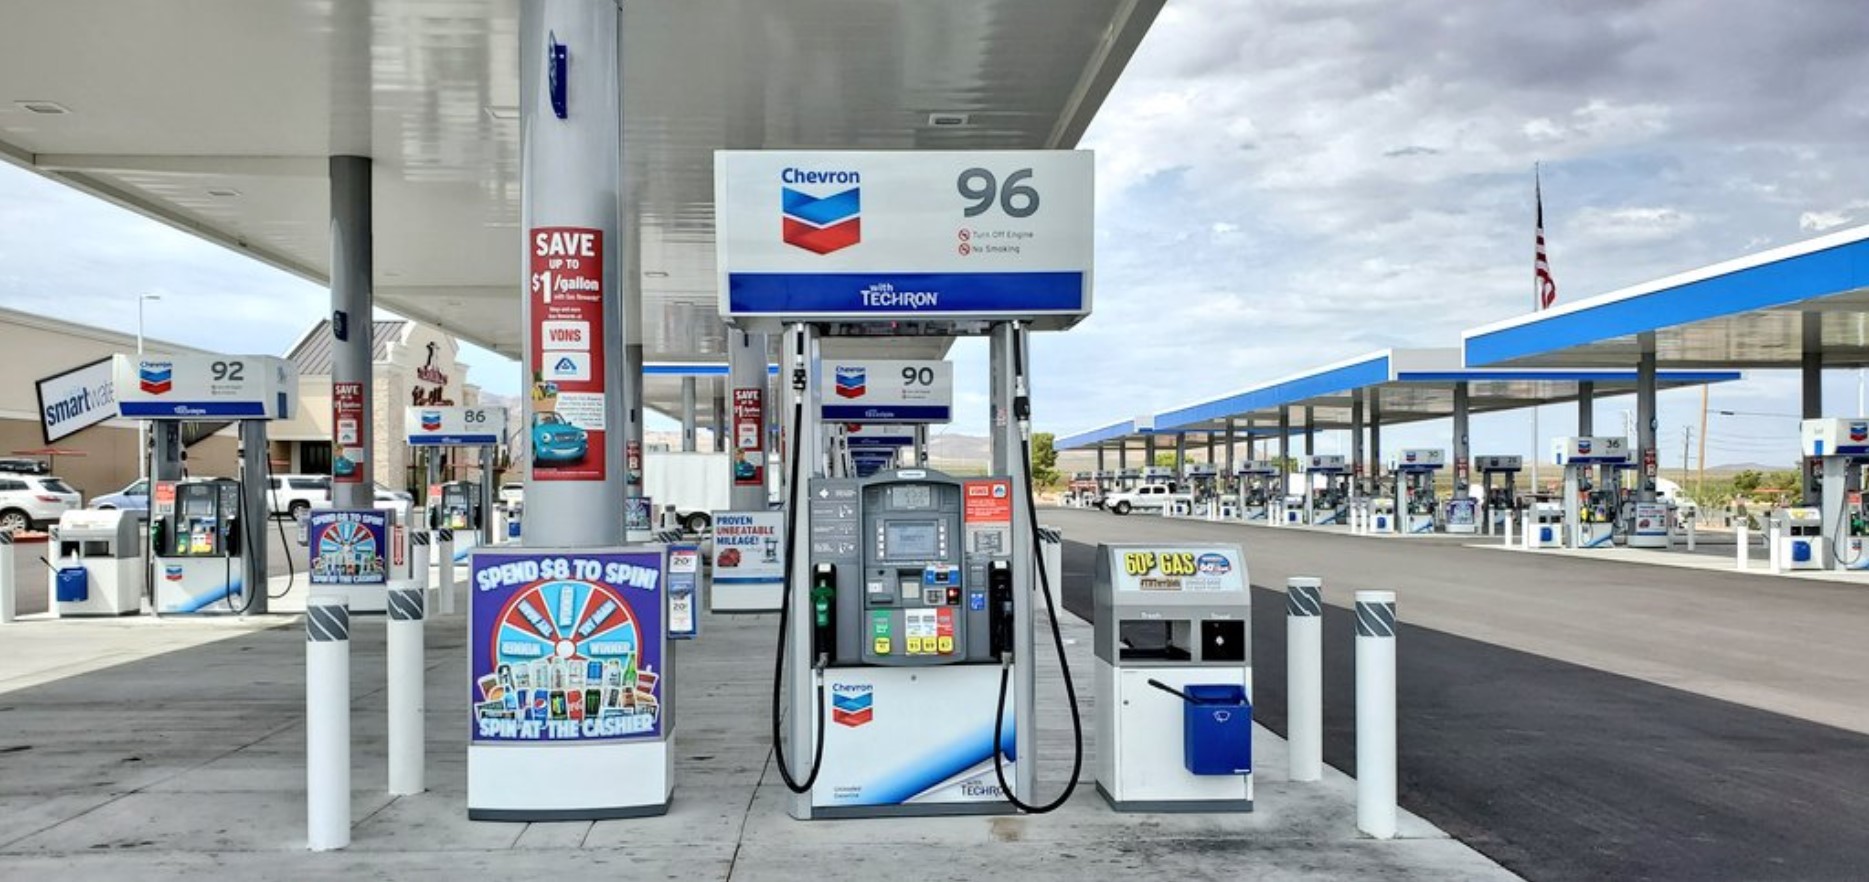 manager-of-chevron-gas-station-refuses-refund-to-customer-after-meter